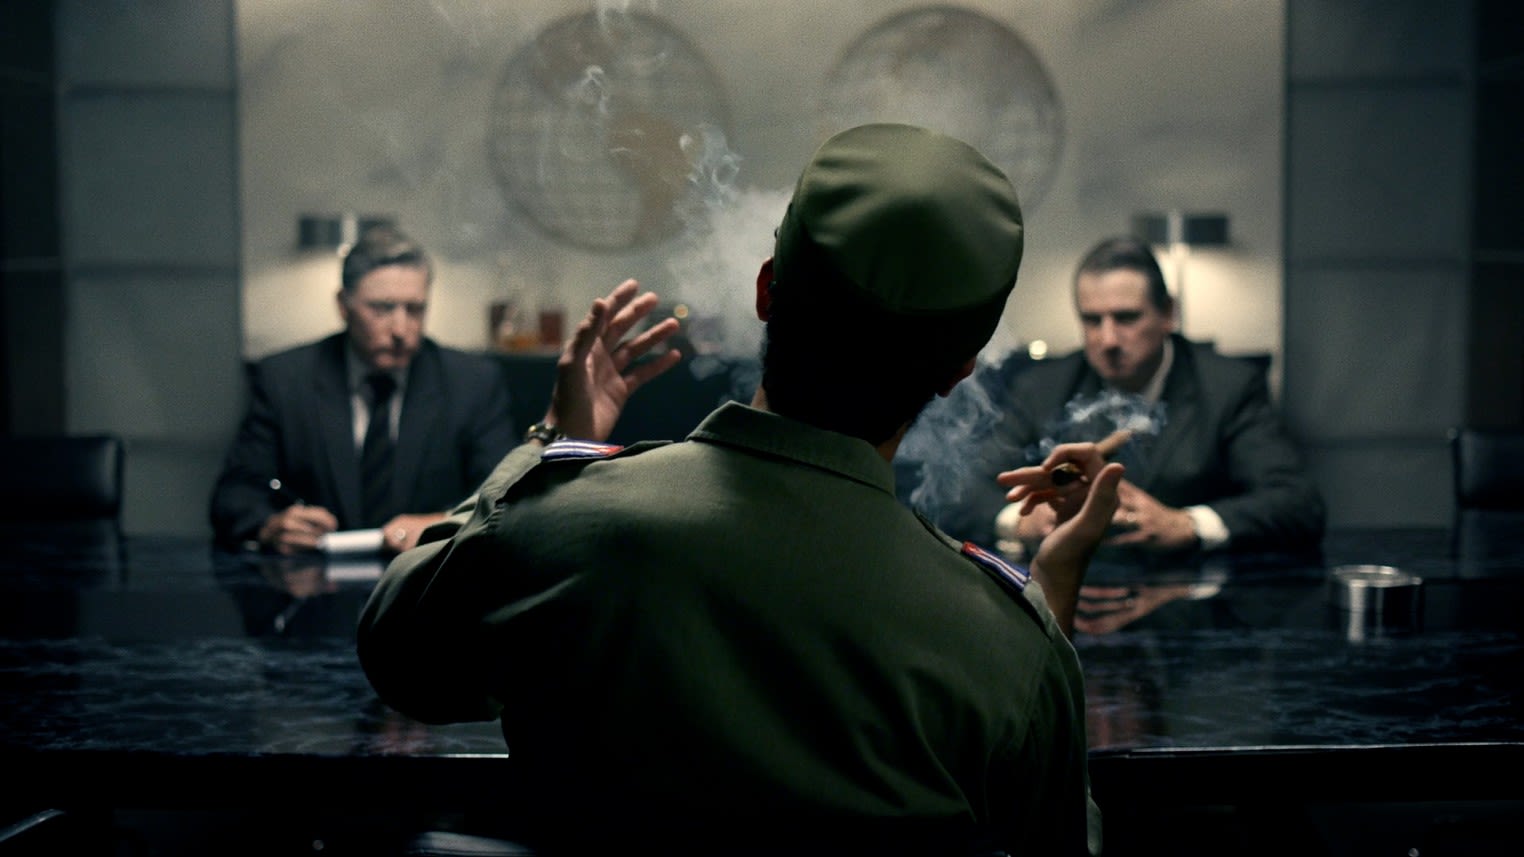 Mafia Spies Tells the Story Behind the CIA's Failed Plan to Assassinate Castro